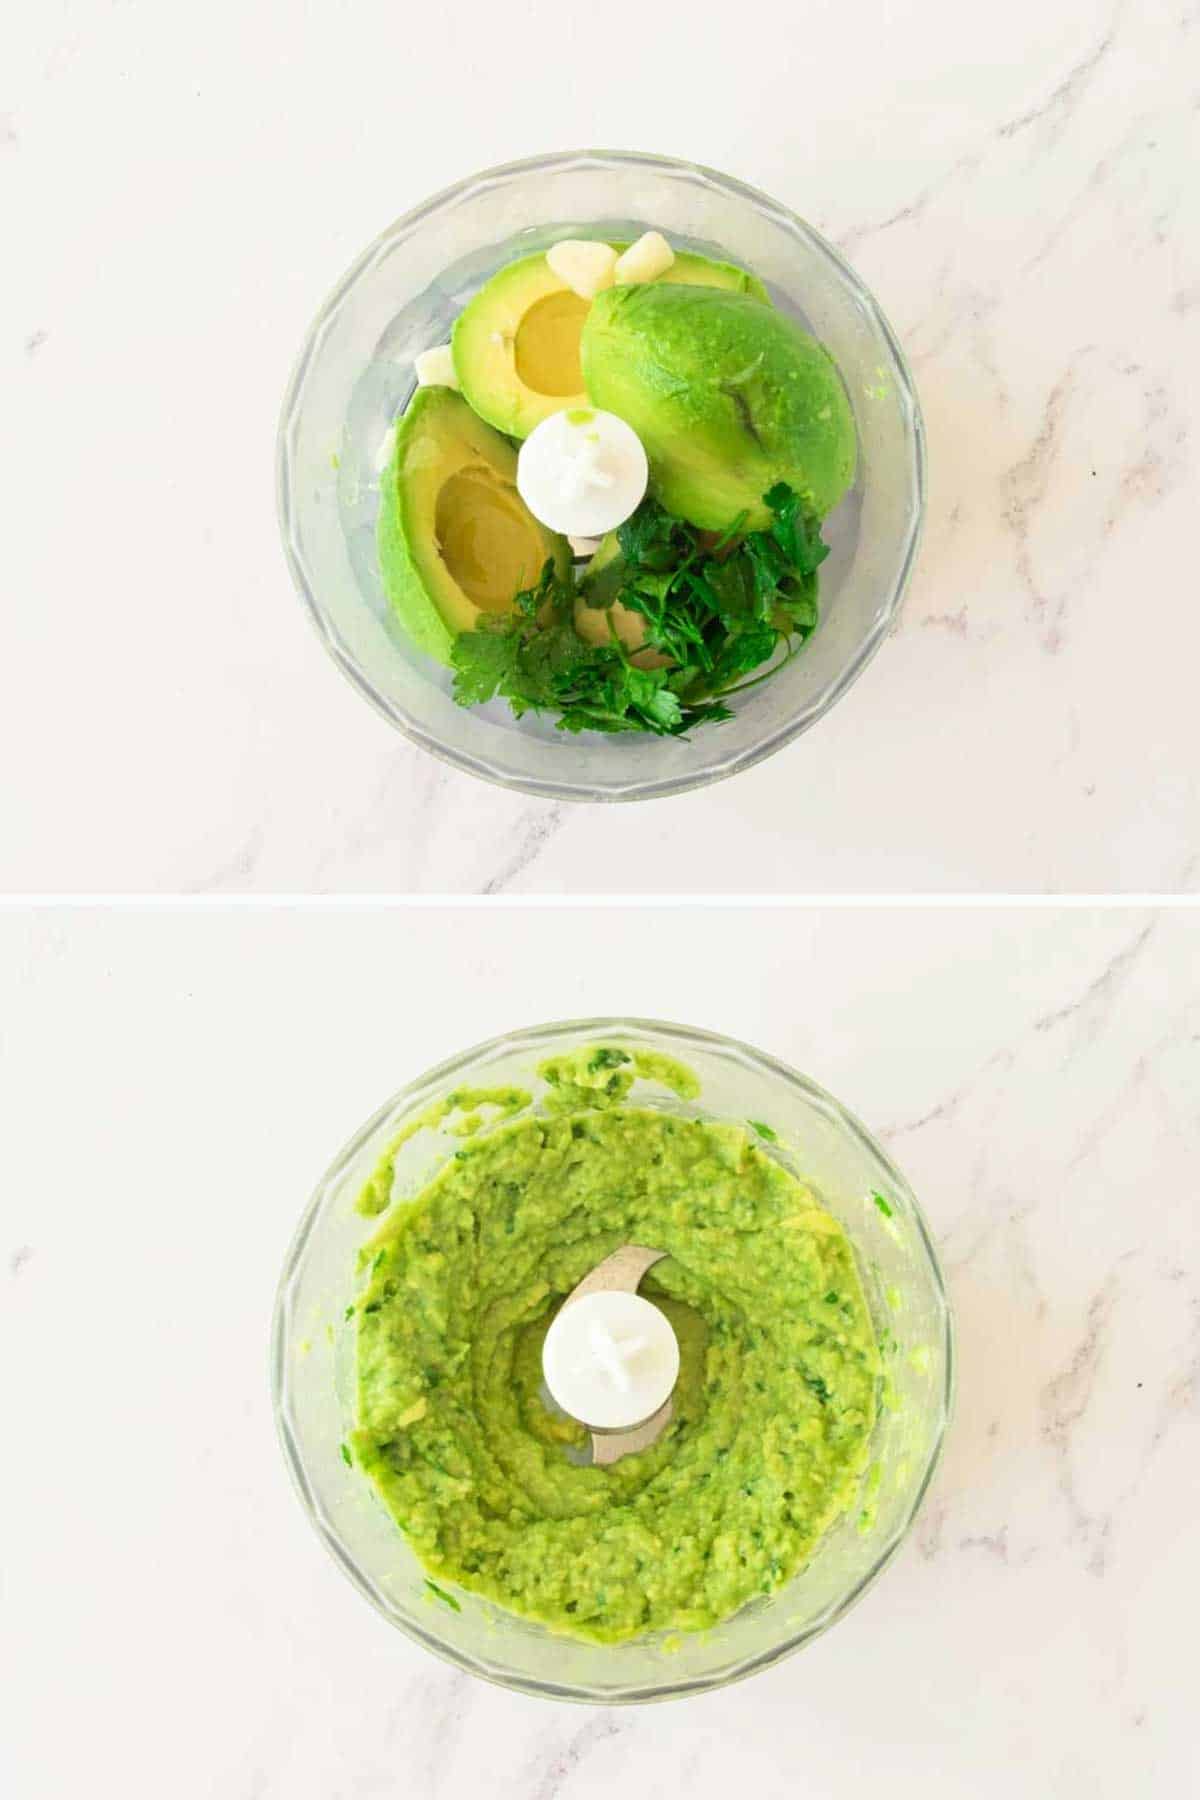 Two images of a food processor. The top image shows ingredients like avocado, garlic, and herbs in the processor. The bottom image shows the same processor with the ingredients blended into a smooth mixture.